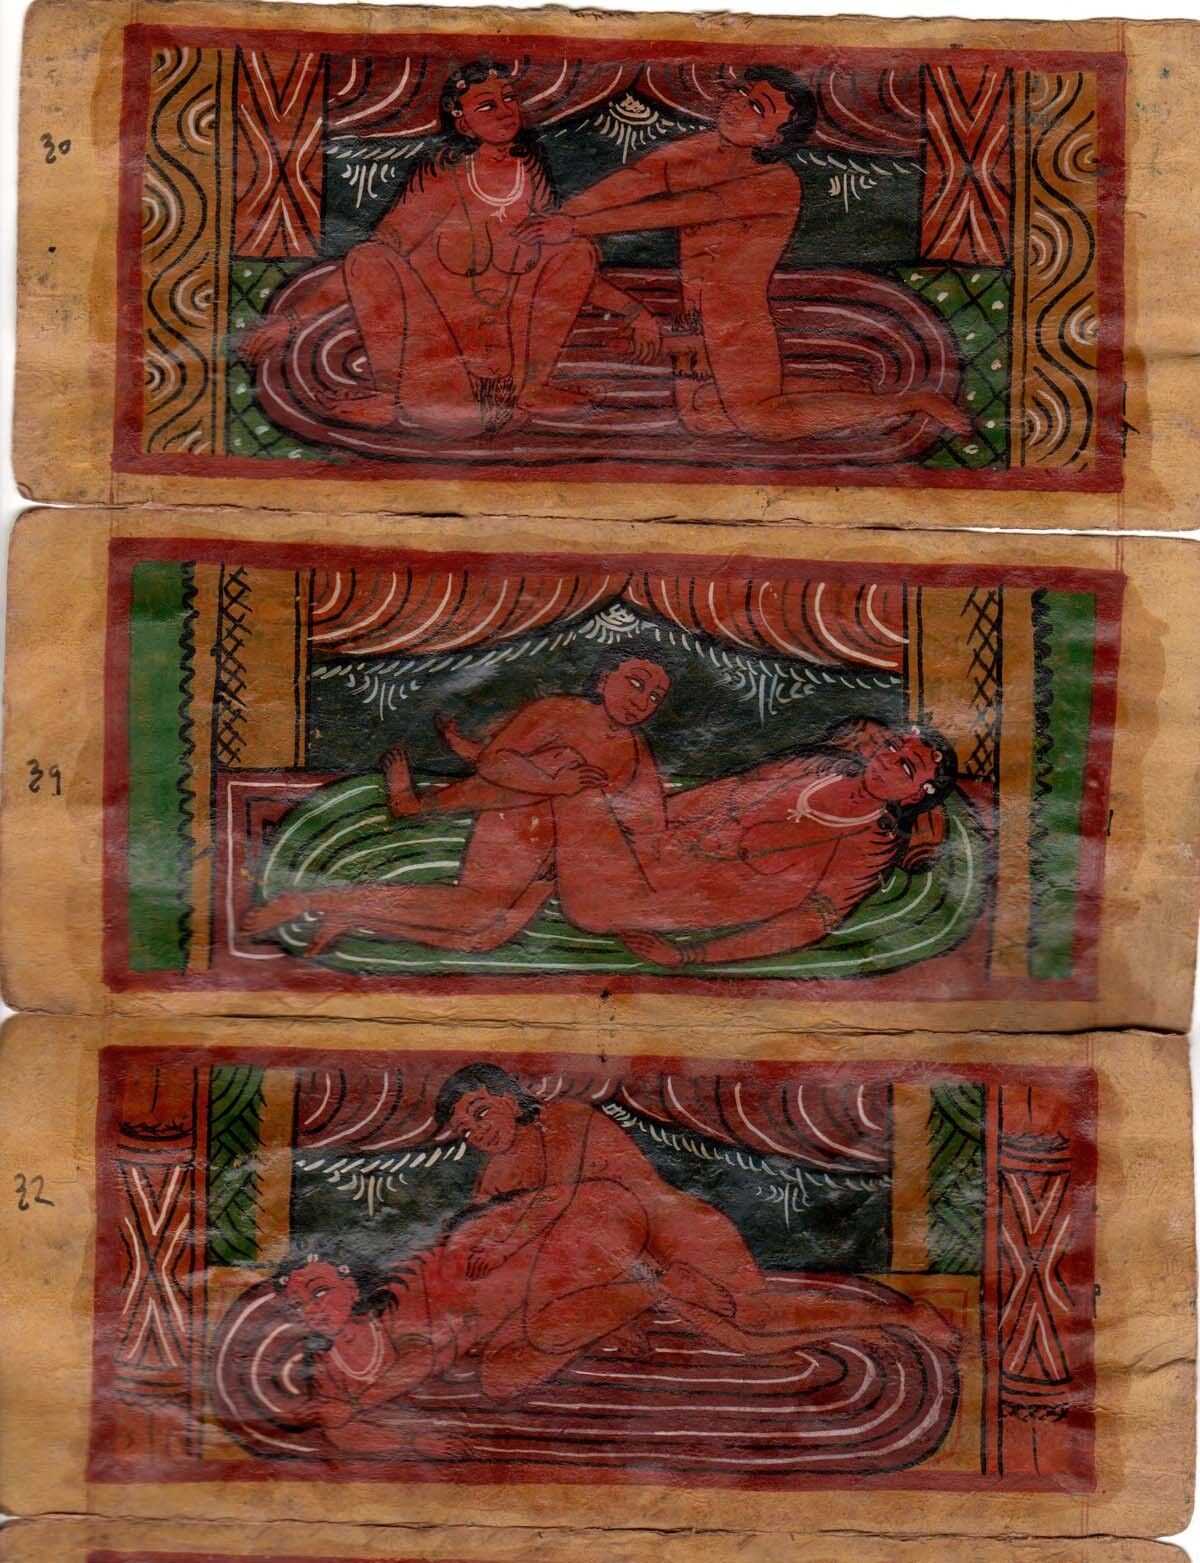 Lot of 8 small 9 cm x 20 cm oil on paper old KAMA SUTRA INDIAN erotic painting